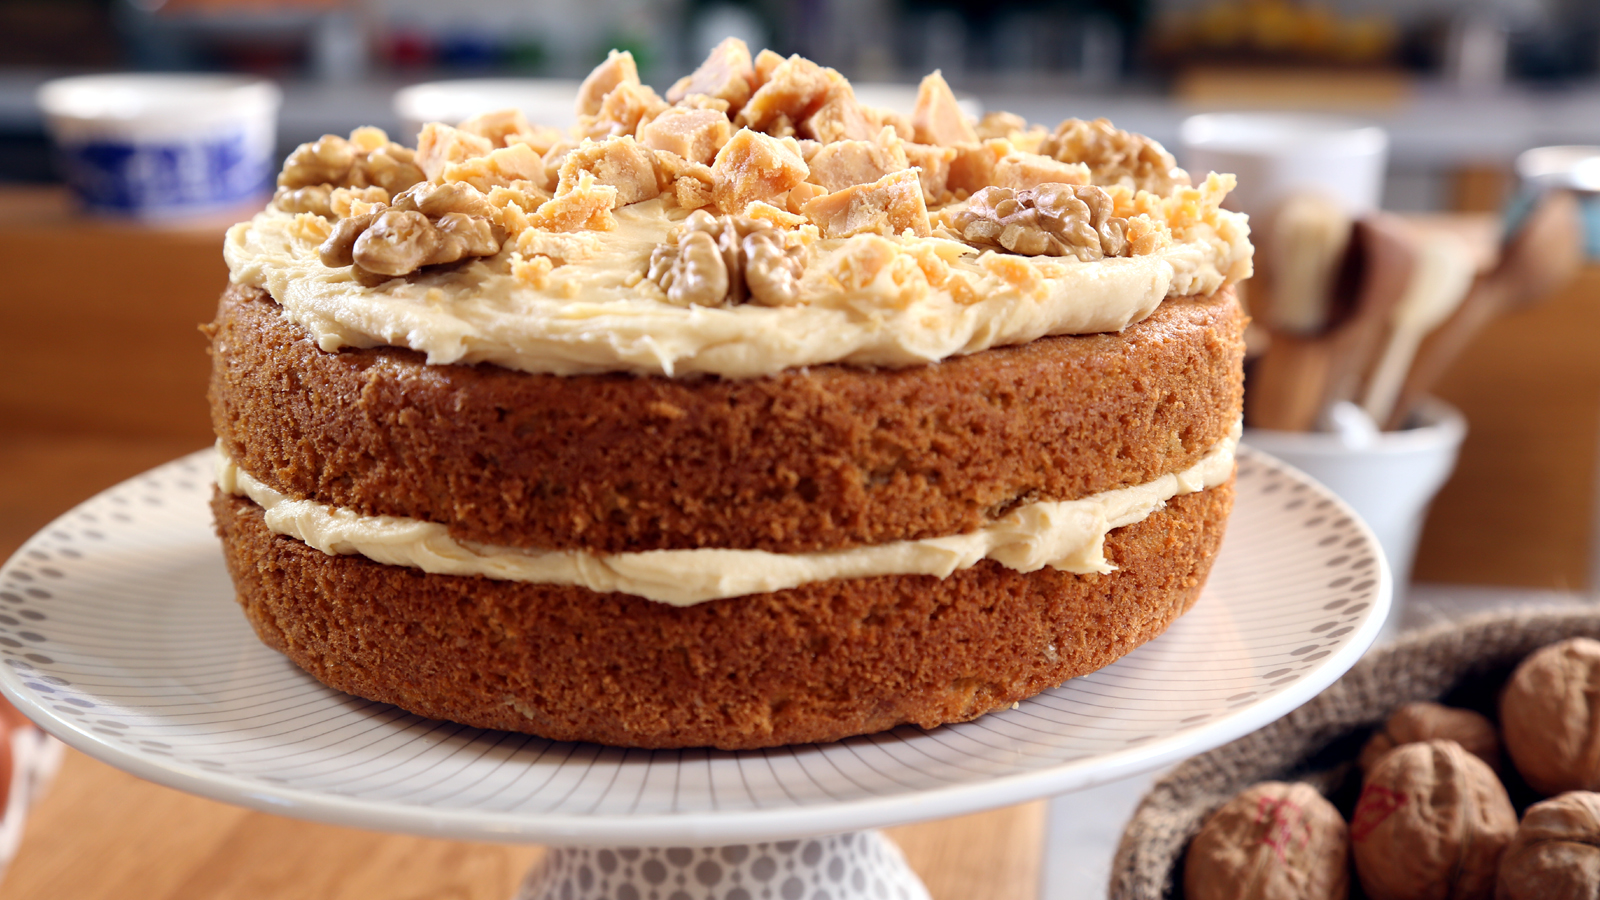 Walnut Cake is a deliciously easy recipe. The cake is so soft and fluffy!